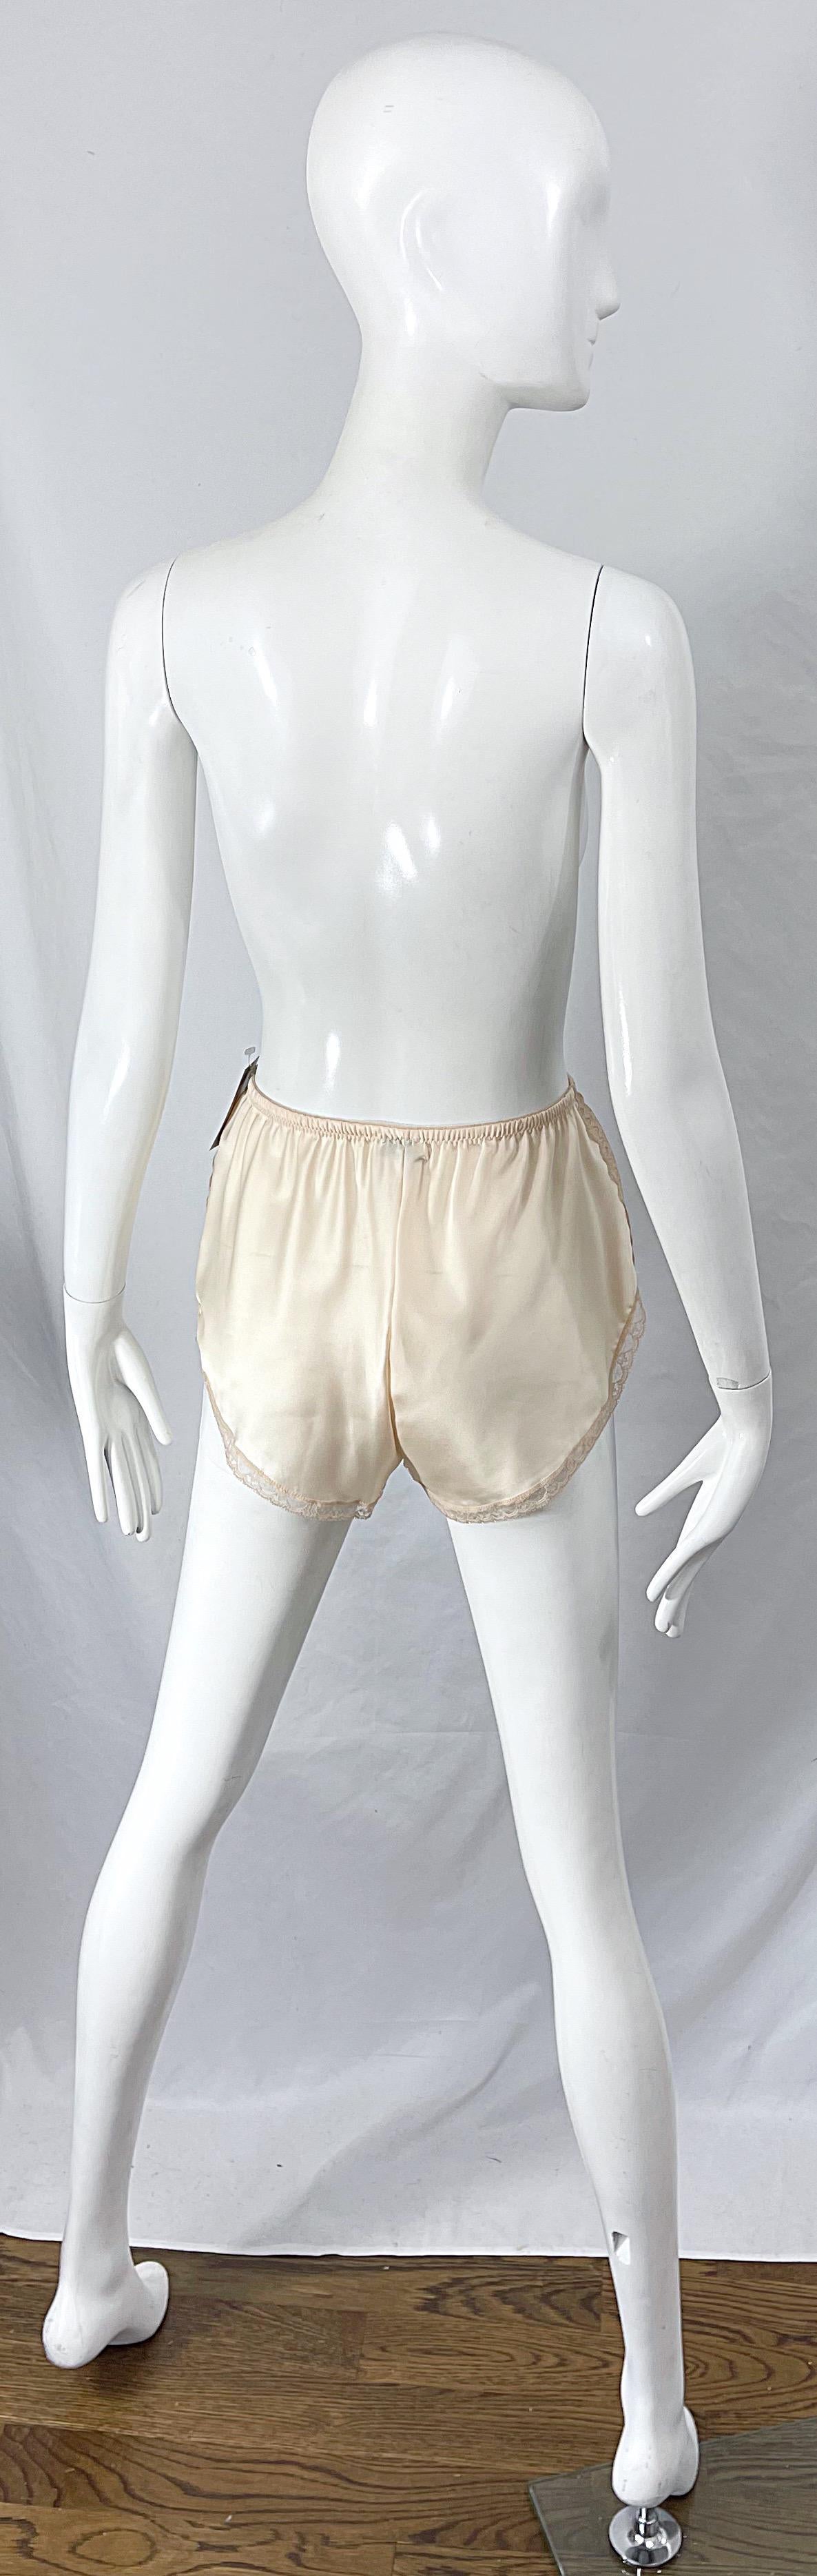 NWT 1980s Christian Dior Ivory Satin Lace Three Piece Cami 80s Lingerie PJ Set  For Sale 1